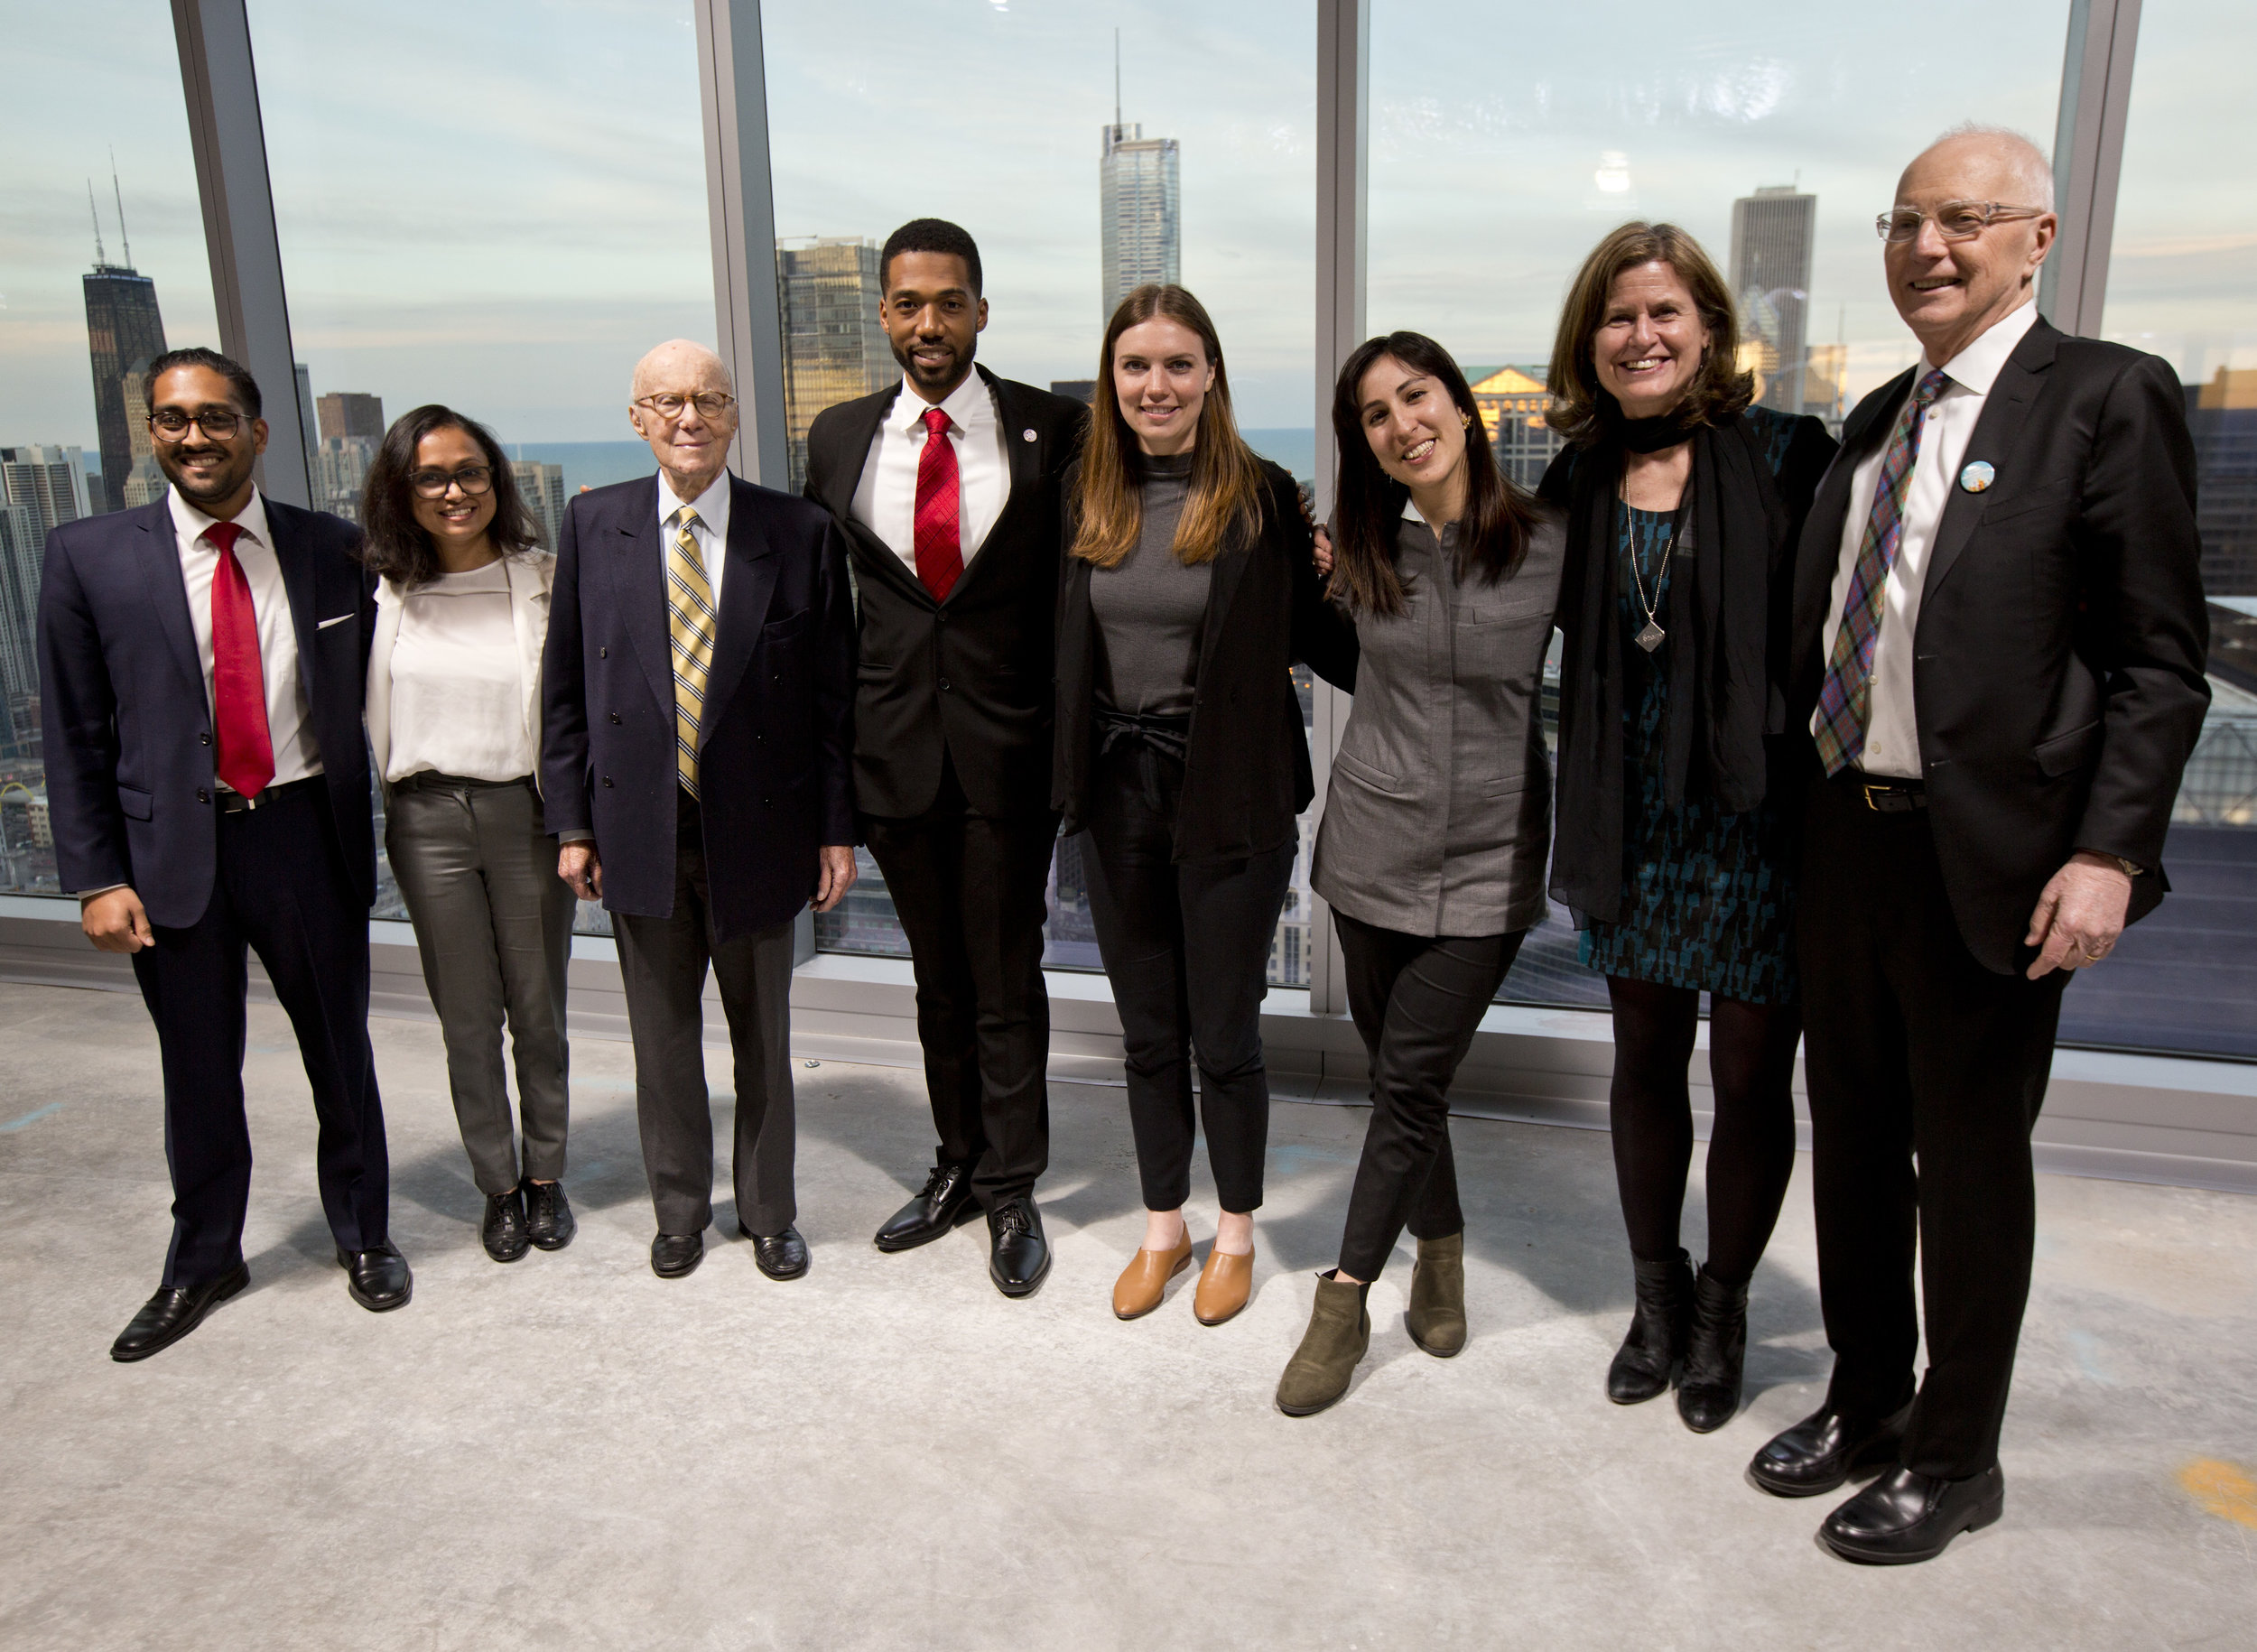  Pictured from left to right: Varun Patel, Shruti Srikar, Gerald Hines (competition sponsor and funder), Ernest Bellamy, Shannon Iacino, Lola Ben-Alon, Theresa Frankiewicz (Jury Chair), Don Carter.  Photo credit: ULI/Nathan Weber  